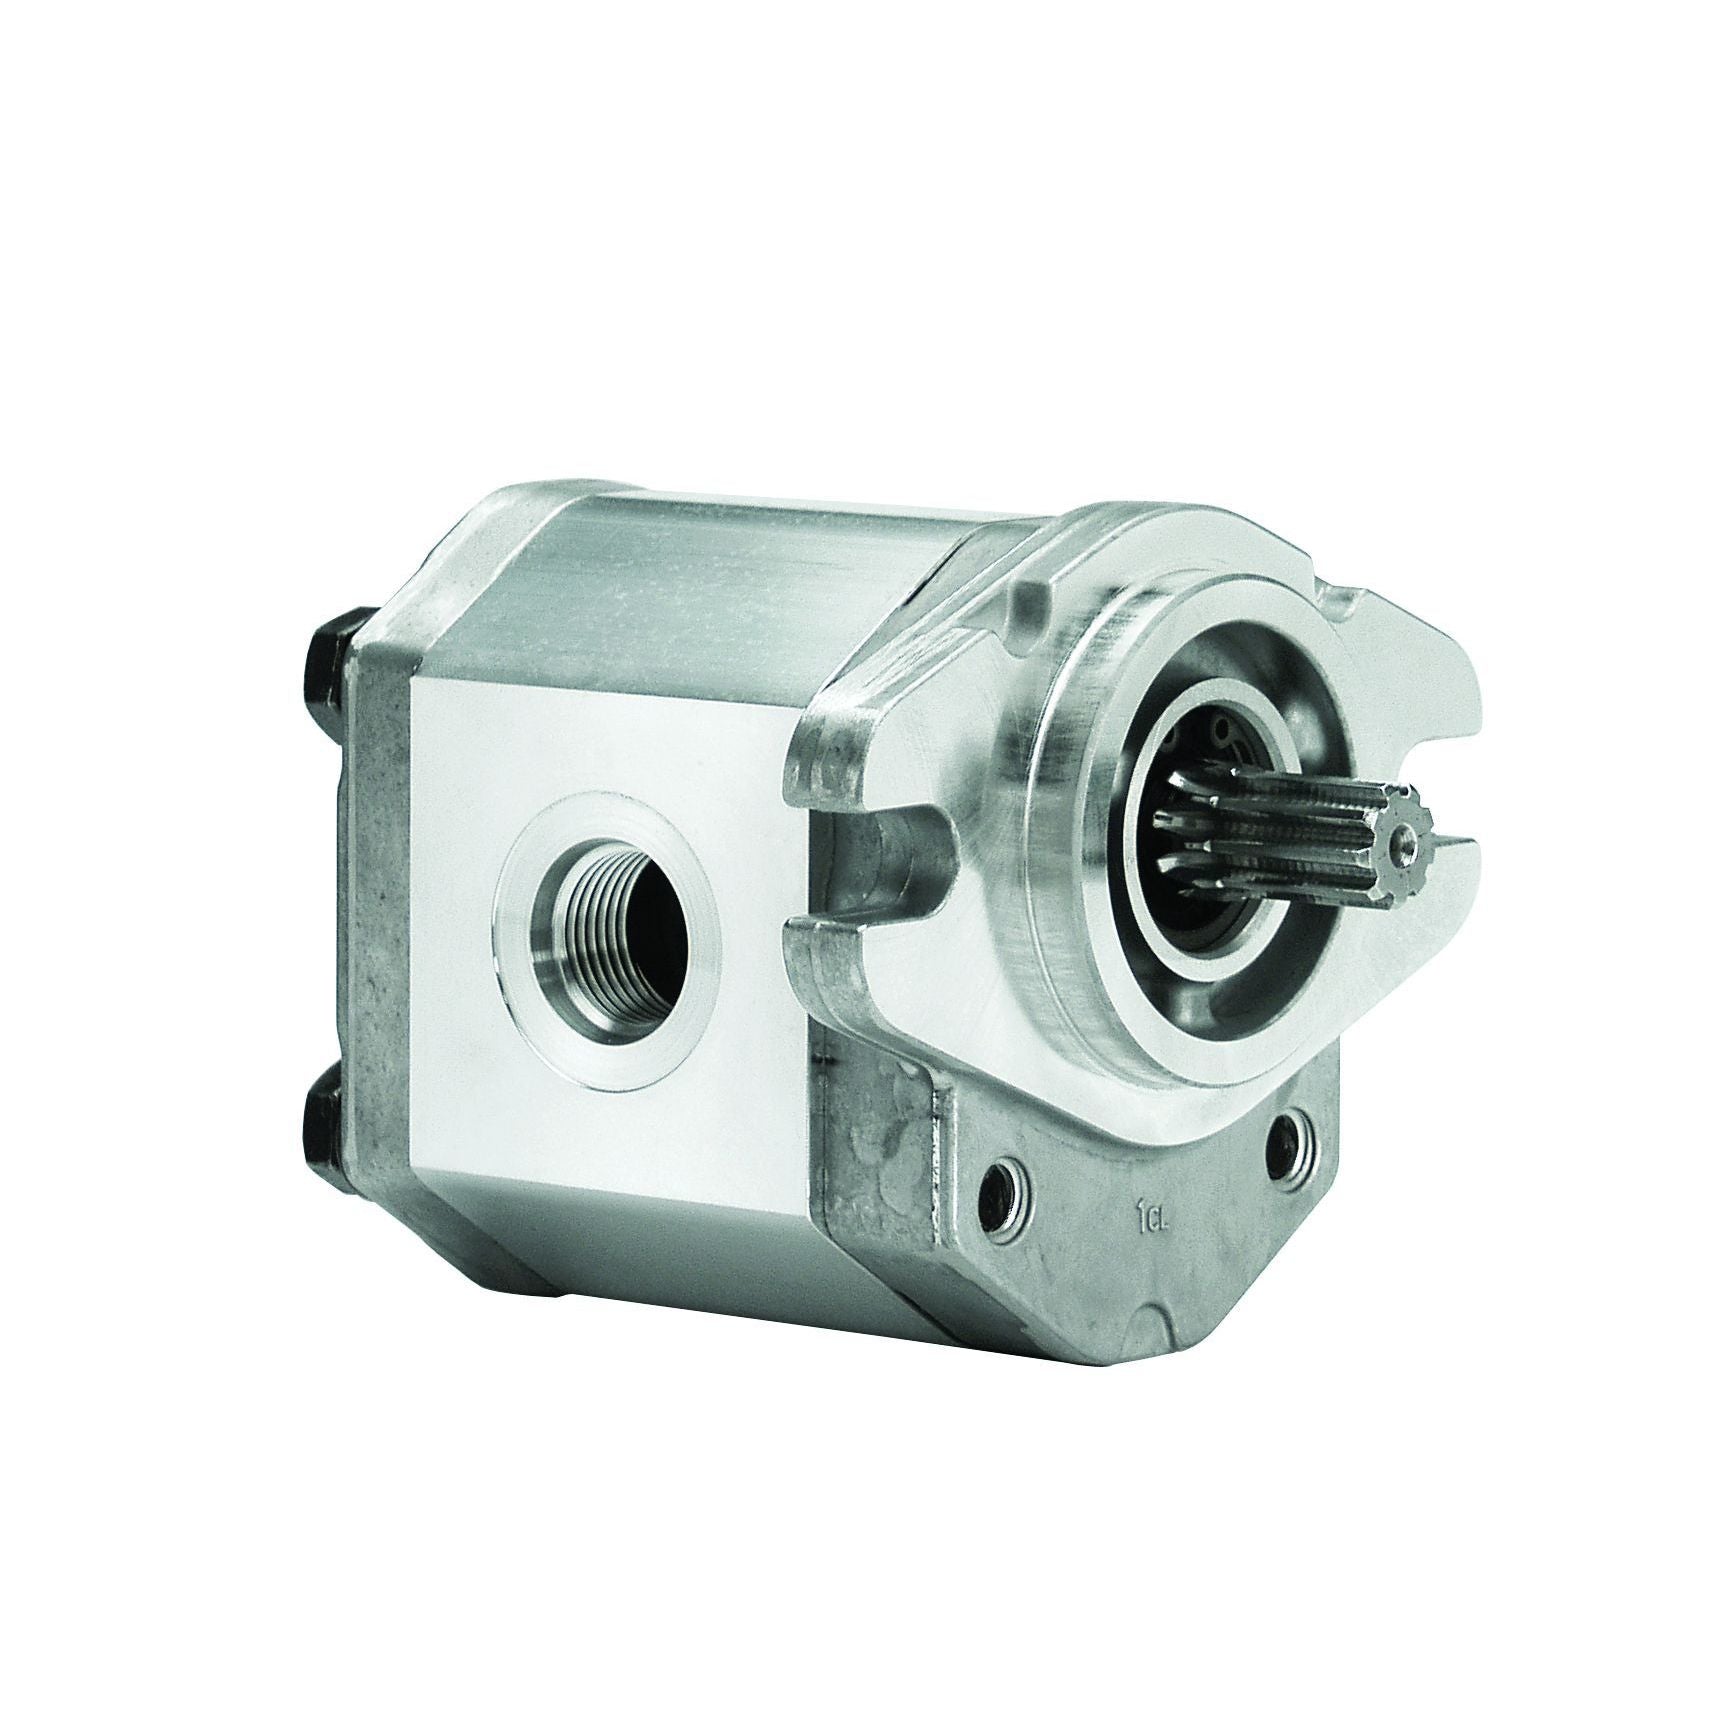 ALP3A-S-120-S1-FA : Marzocchi Gear Pump, CCW, 78cc (4.758in3), 37.08 GPM, 2320psi, 2300 RPM, #24 SAE (1.5") In, #12 SAE (3/4") Out, Splined Shaft 13T 16/32DP, SAE B 2-Bolt Mount